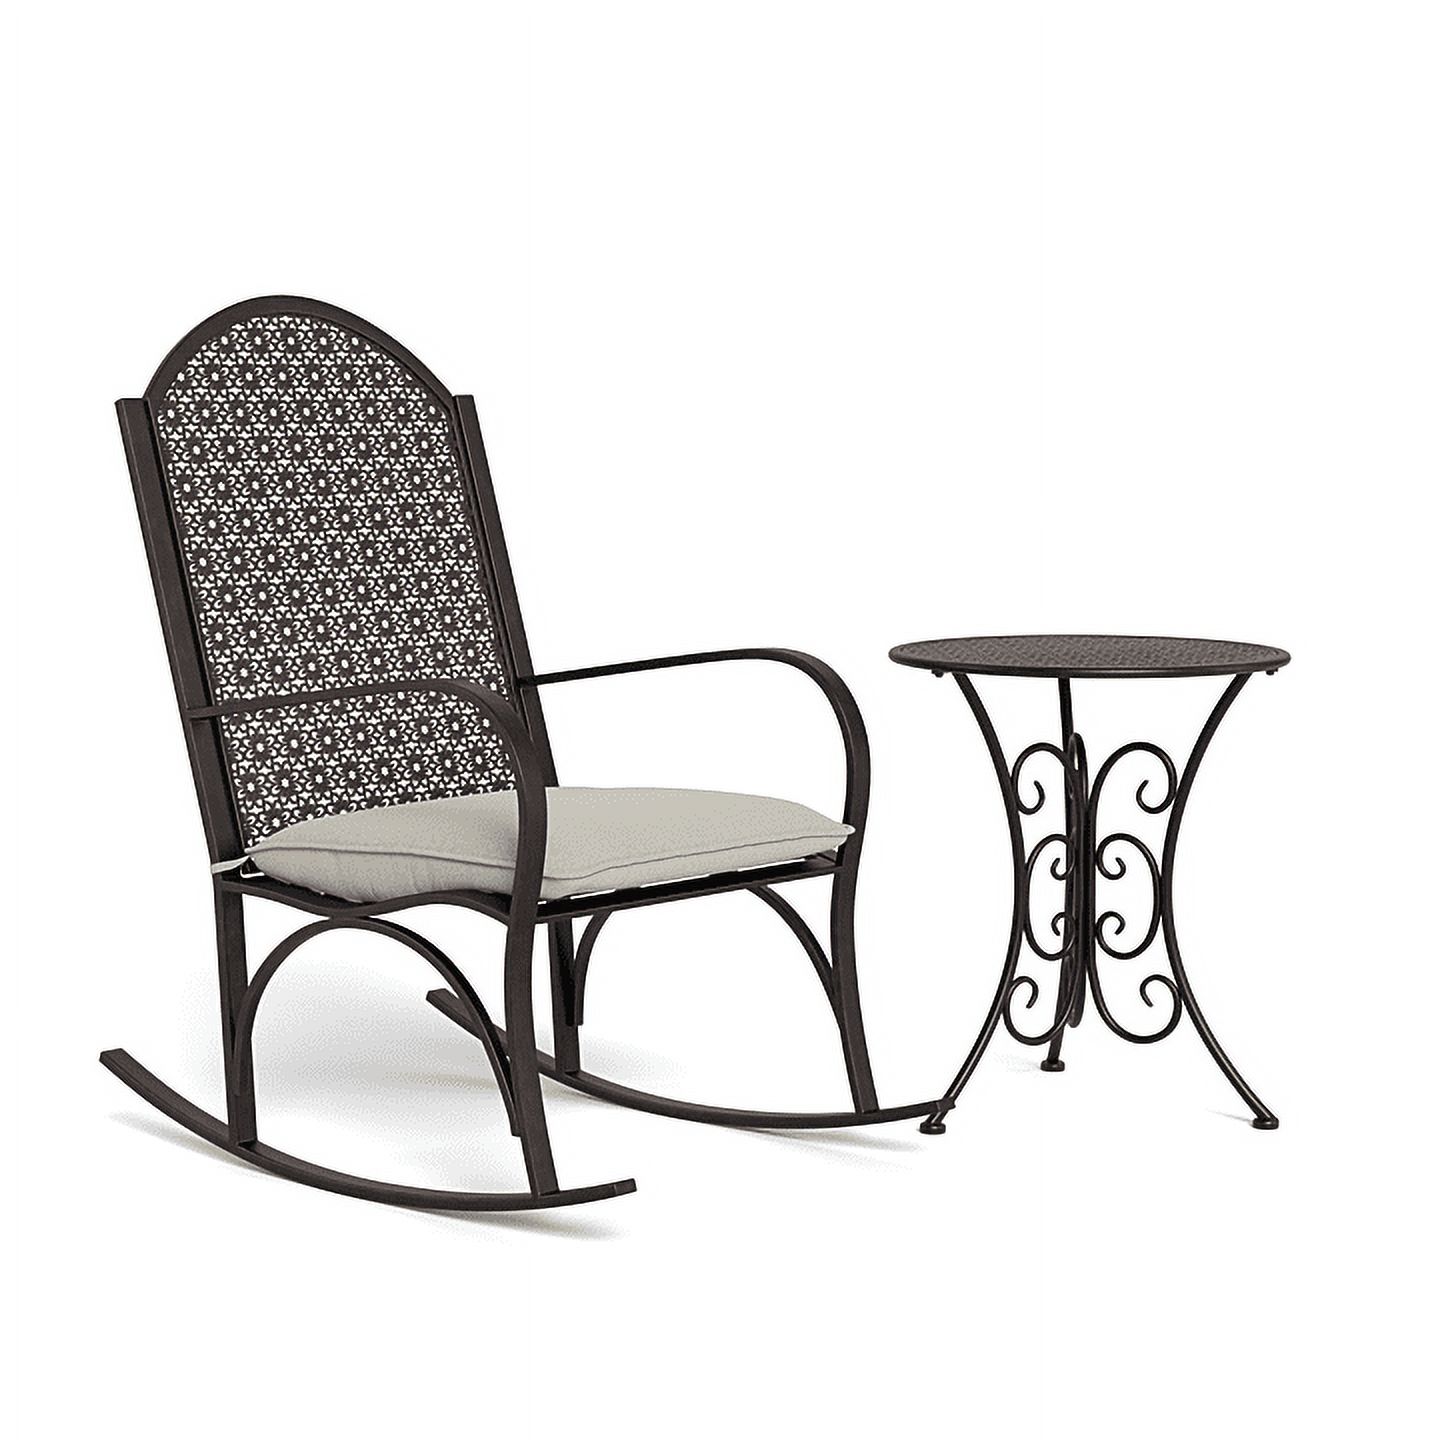 Tortuga Outdoor Garden Rocking Chair with Side Table - Oiled Copper Finish, Beige Cushion - image 2 of 11